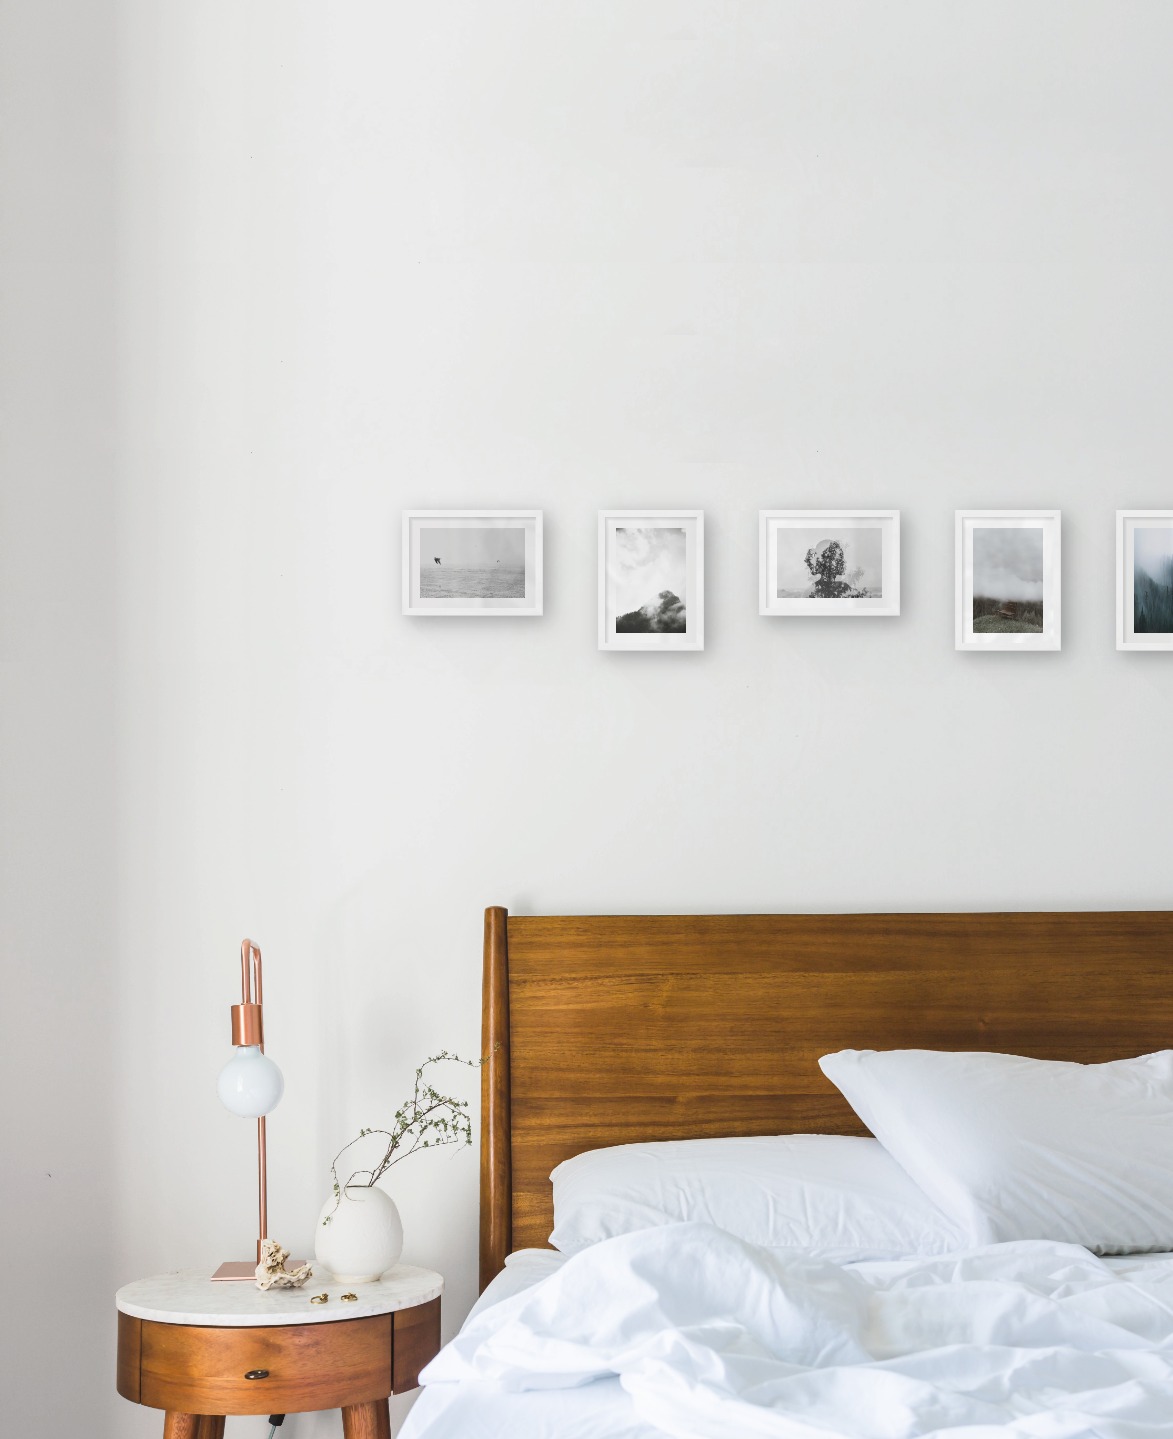 Gallery wall with picture frames in white in sizes 13x18 with prints "Birds over the sea", "Trees and mountains in fog", "Trees and silhouette", "Bench in misty nature" and "Foggy forest"